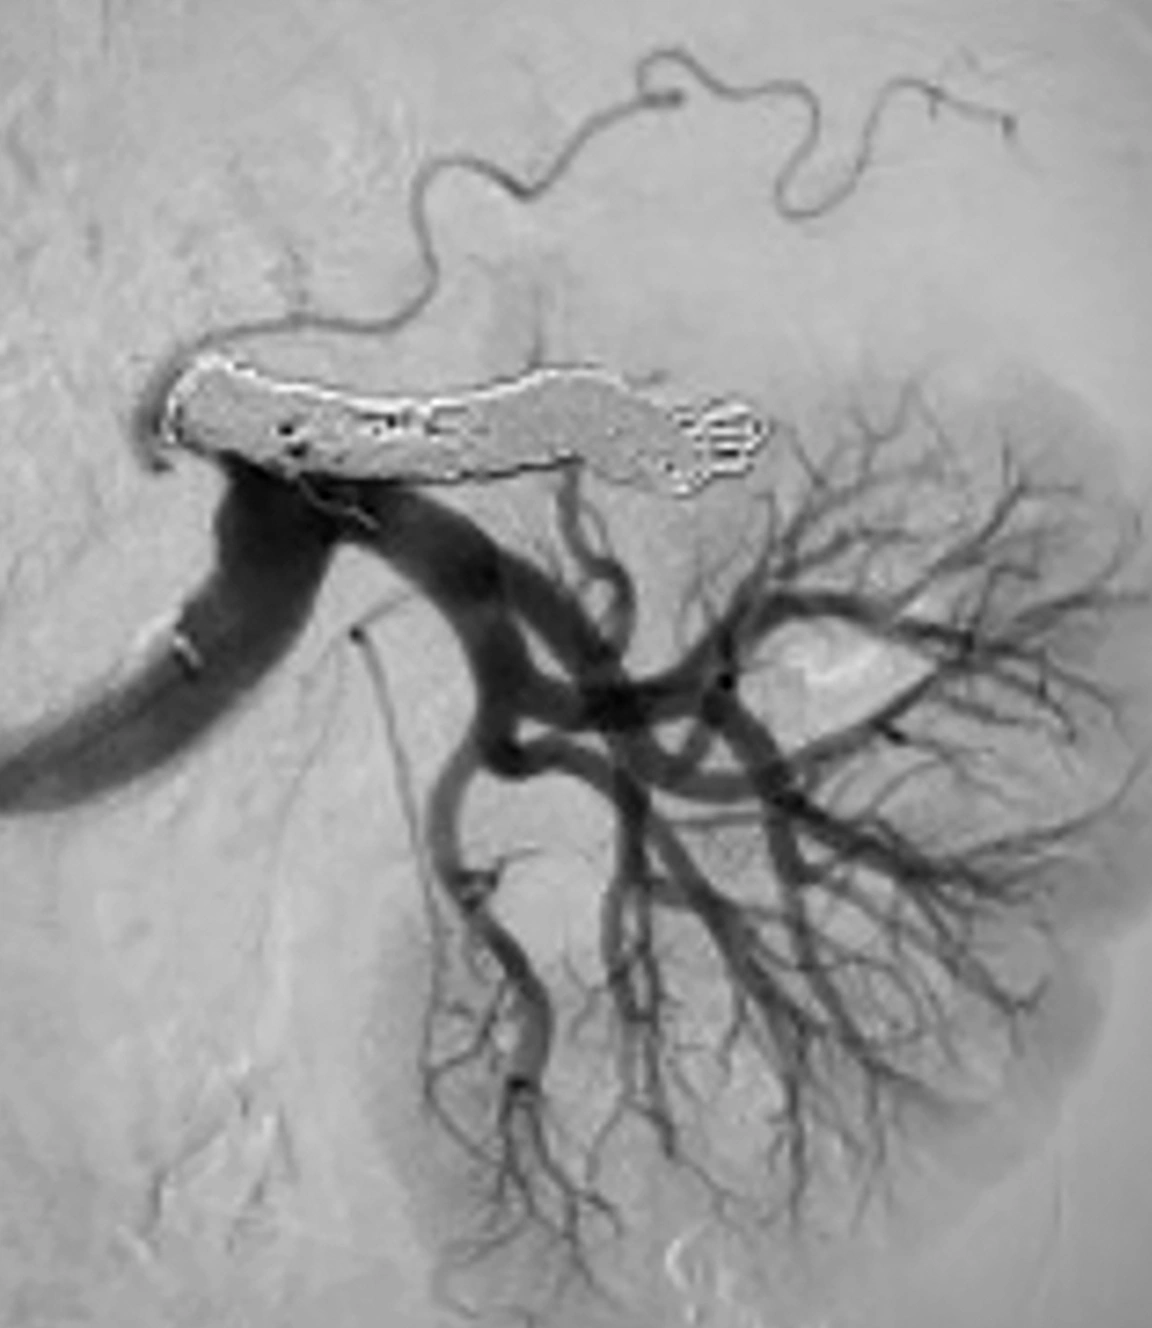 Angiogram of coil pack in renal arteriovenous malformation embolized with POD coils